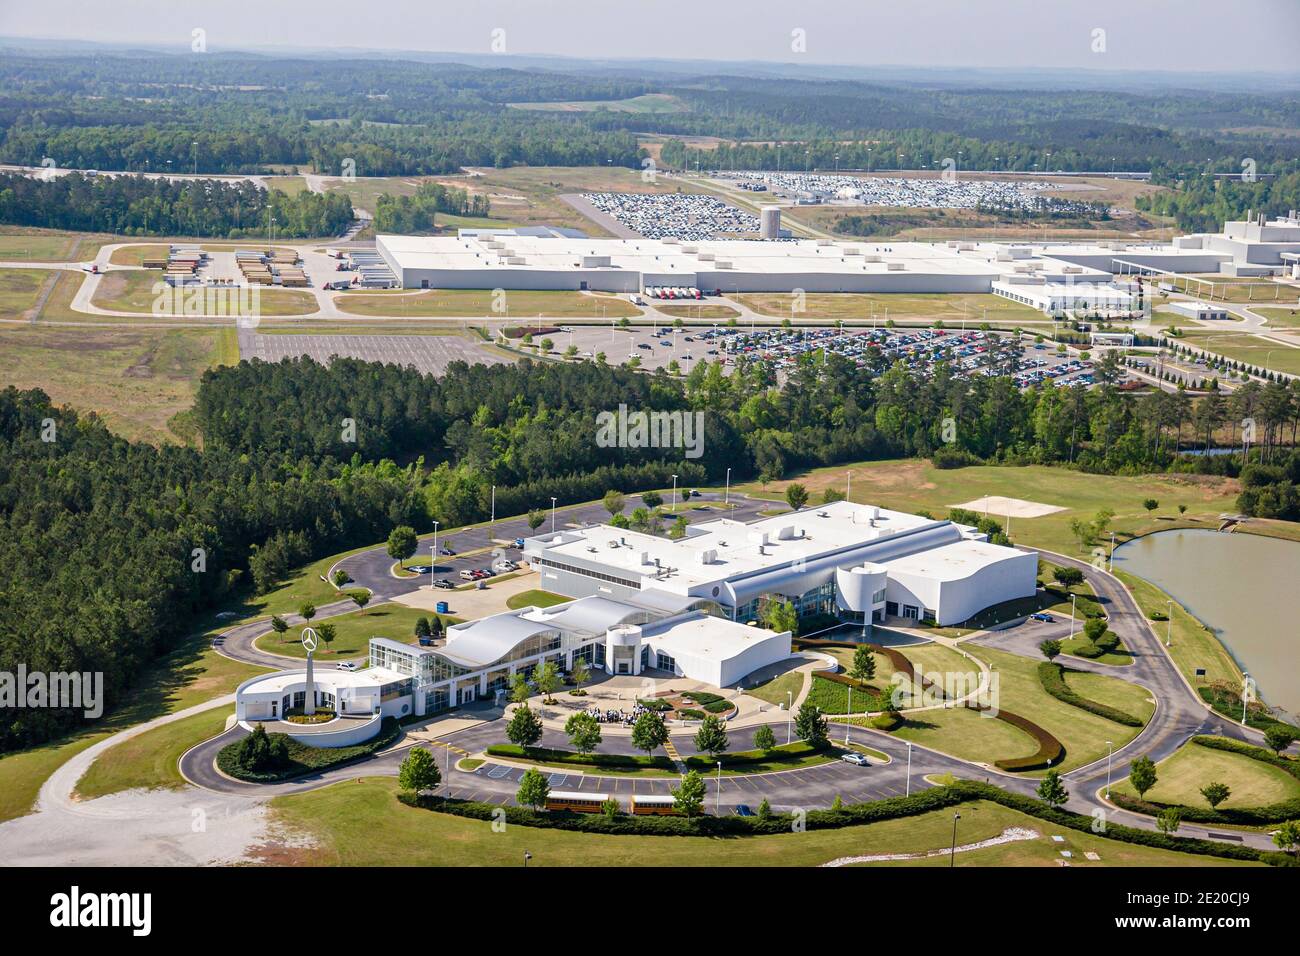 Alabama Vance Mercedes Benz German SUV manufacturing plant,aerial overhead view Visitors Center centre, Stock Photo